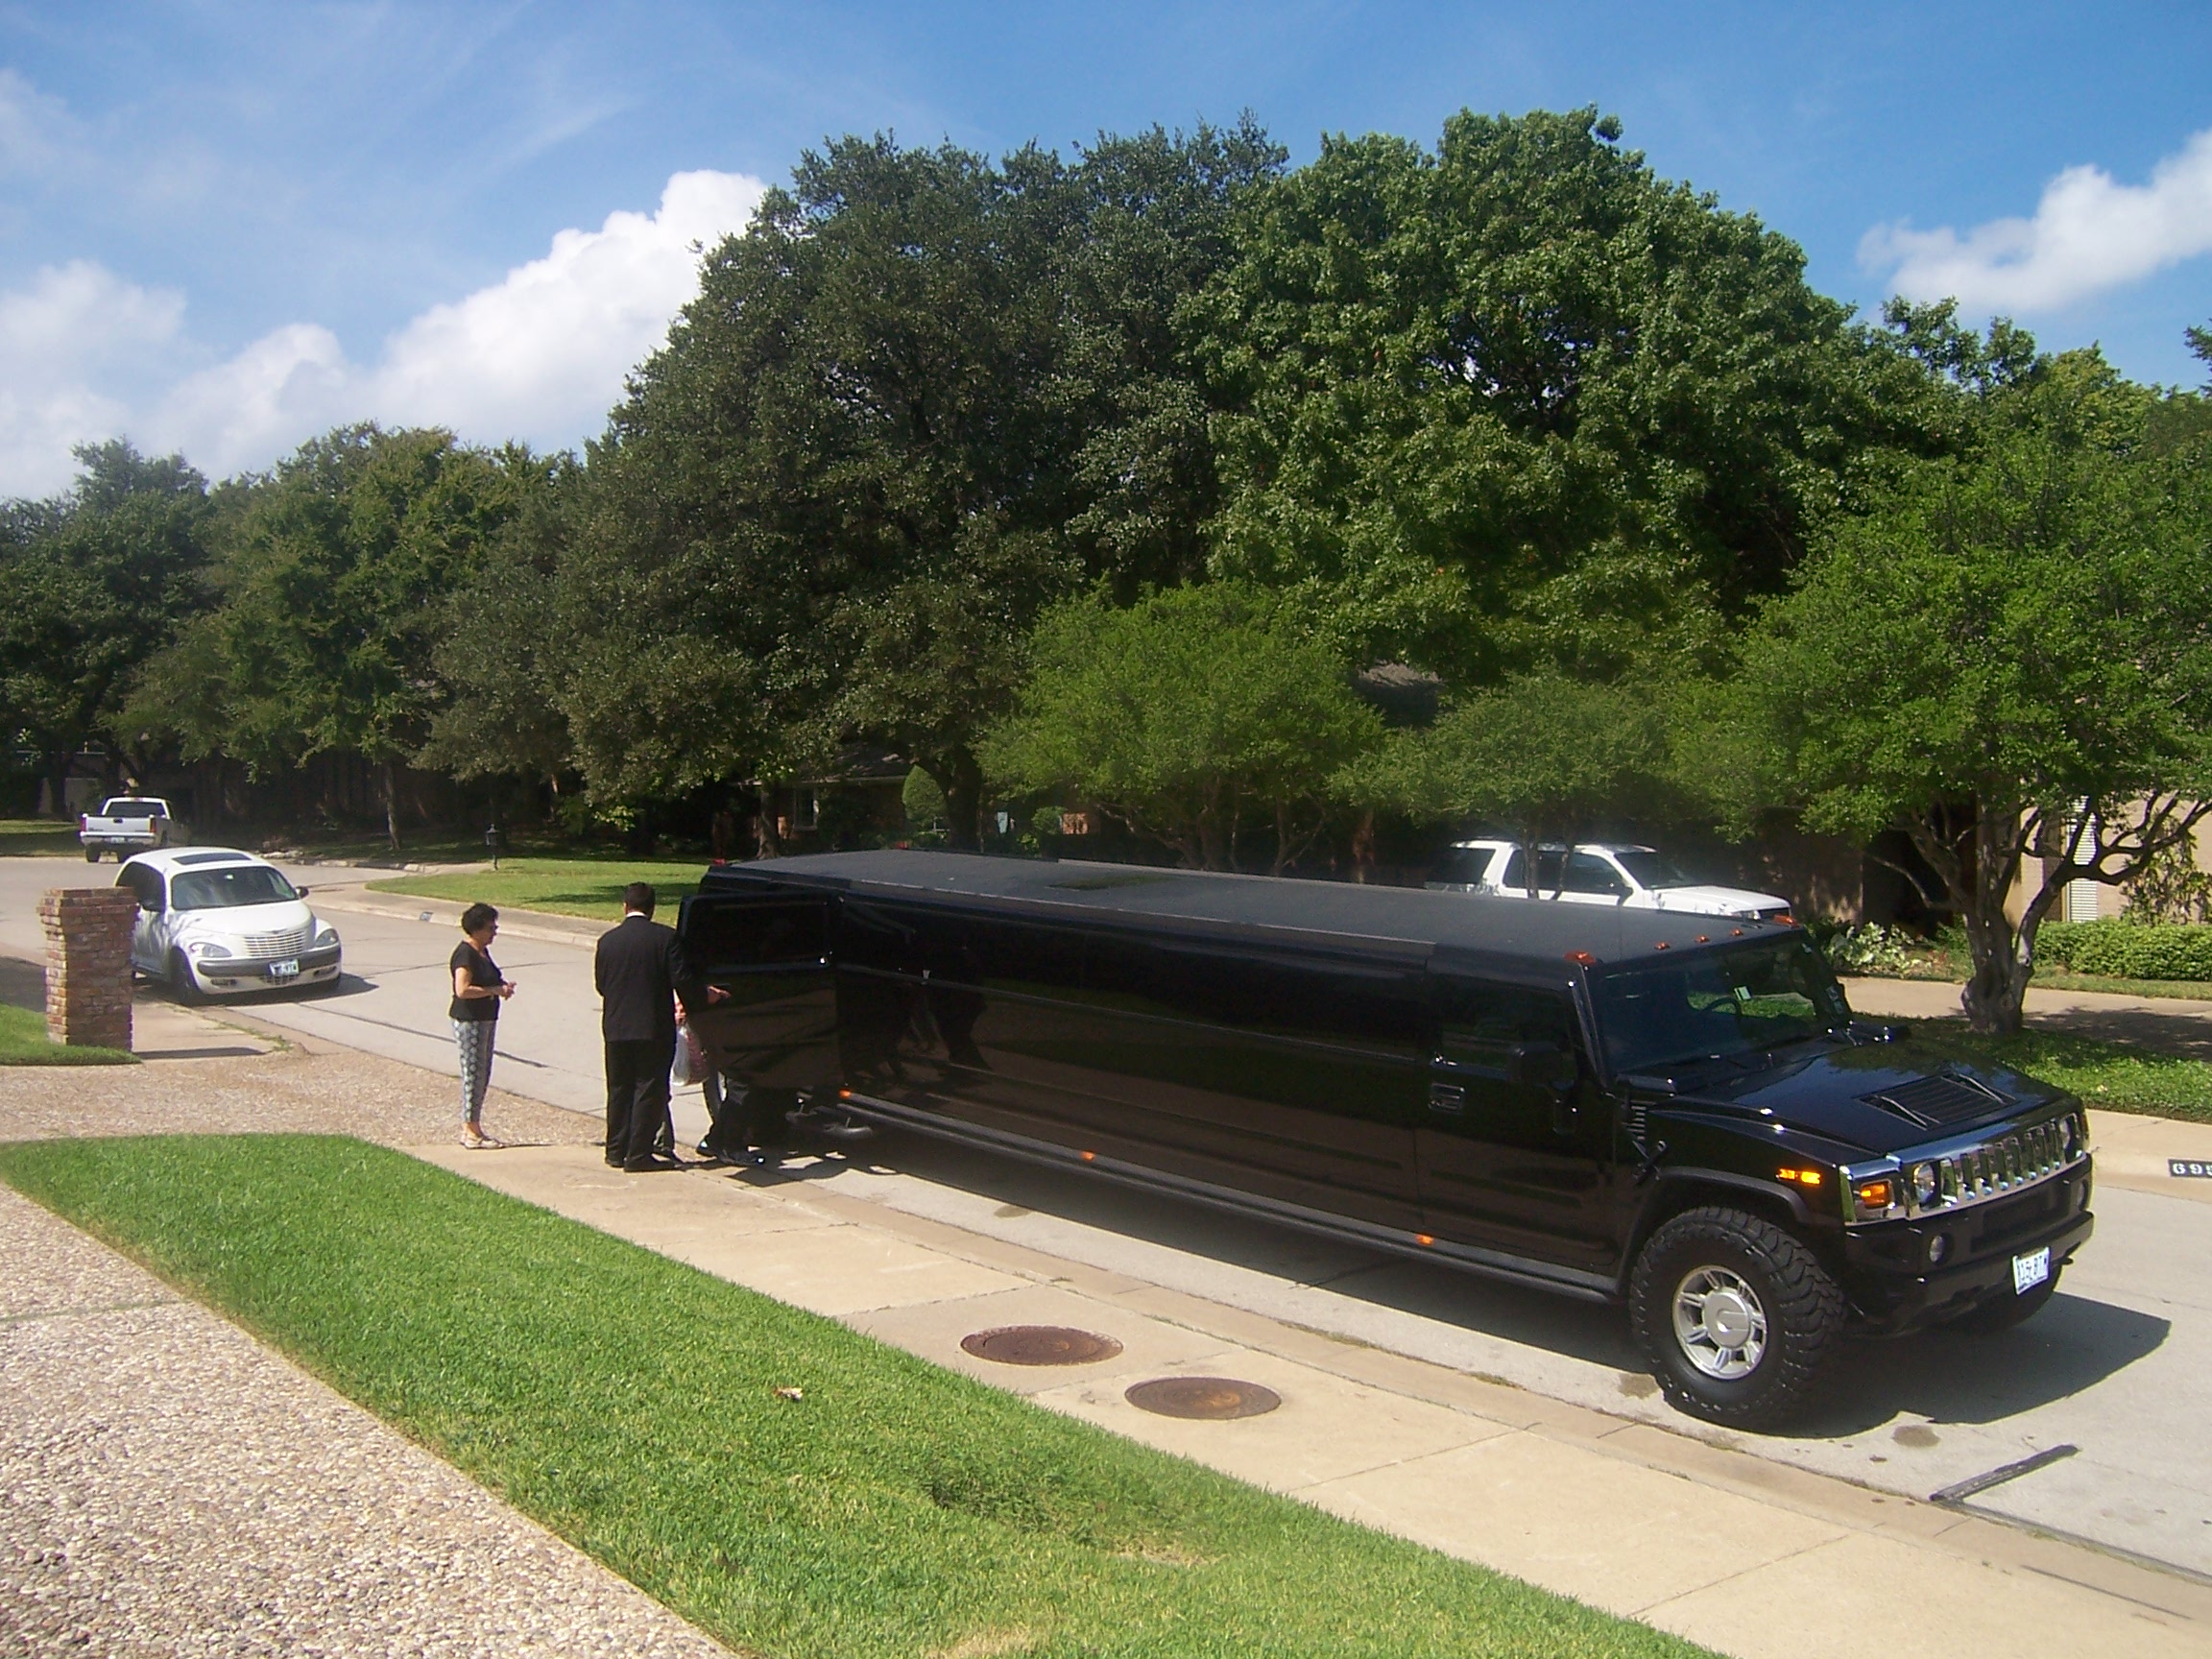 A Hummer Limo for Jacobs 12th Birthday. The hummer took them to a Painball course.